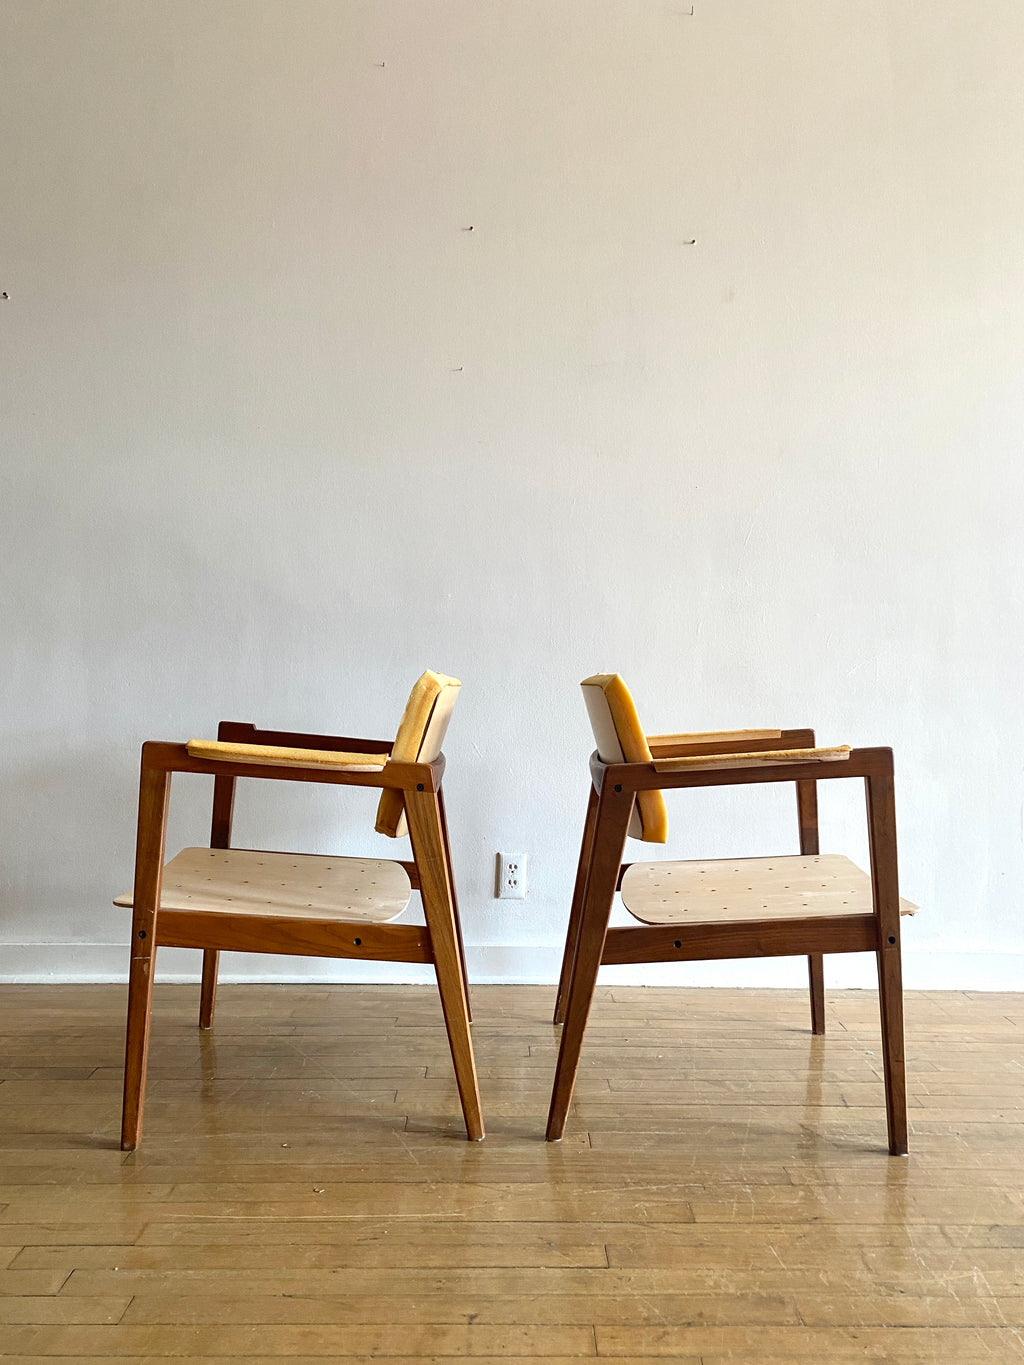 Pair of Swedish Teak Lounge Chairs and Upholstery Labor